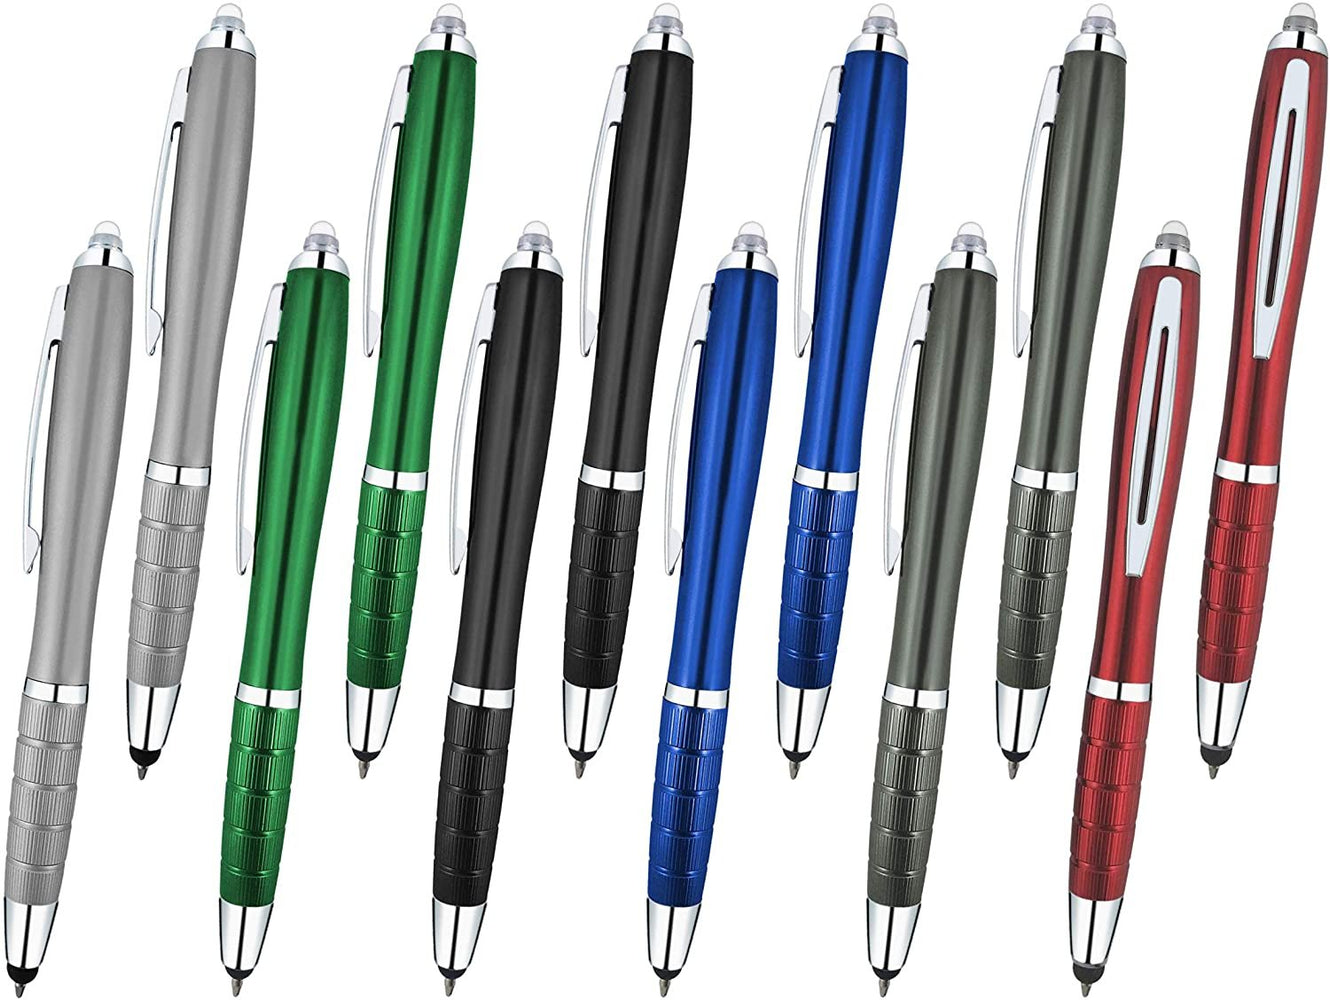 3-1 Twist Action Multi-Function, Ball point Black Ink Pen, Capacitive Stylus for Touchscreen Devices, LED Flashlight, Medical Pen Light,For Home,Work,Doctors, and Nurses By SyPen (Multi-Color 12-Pack)